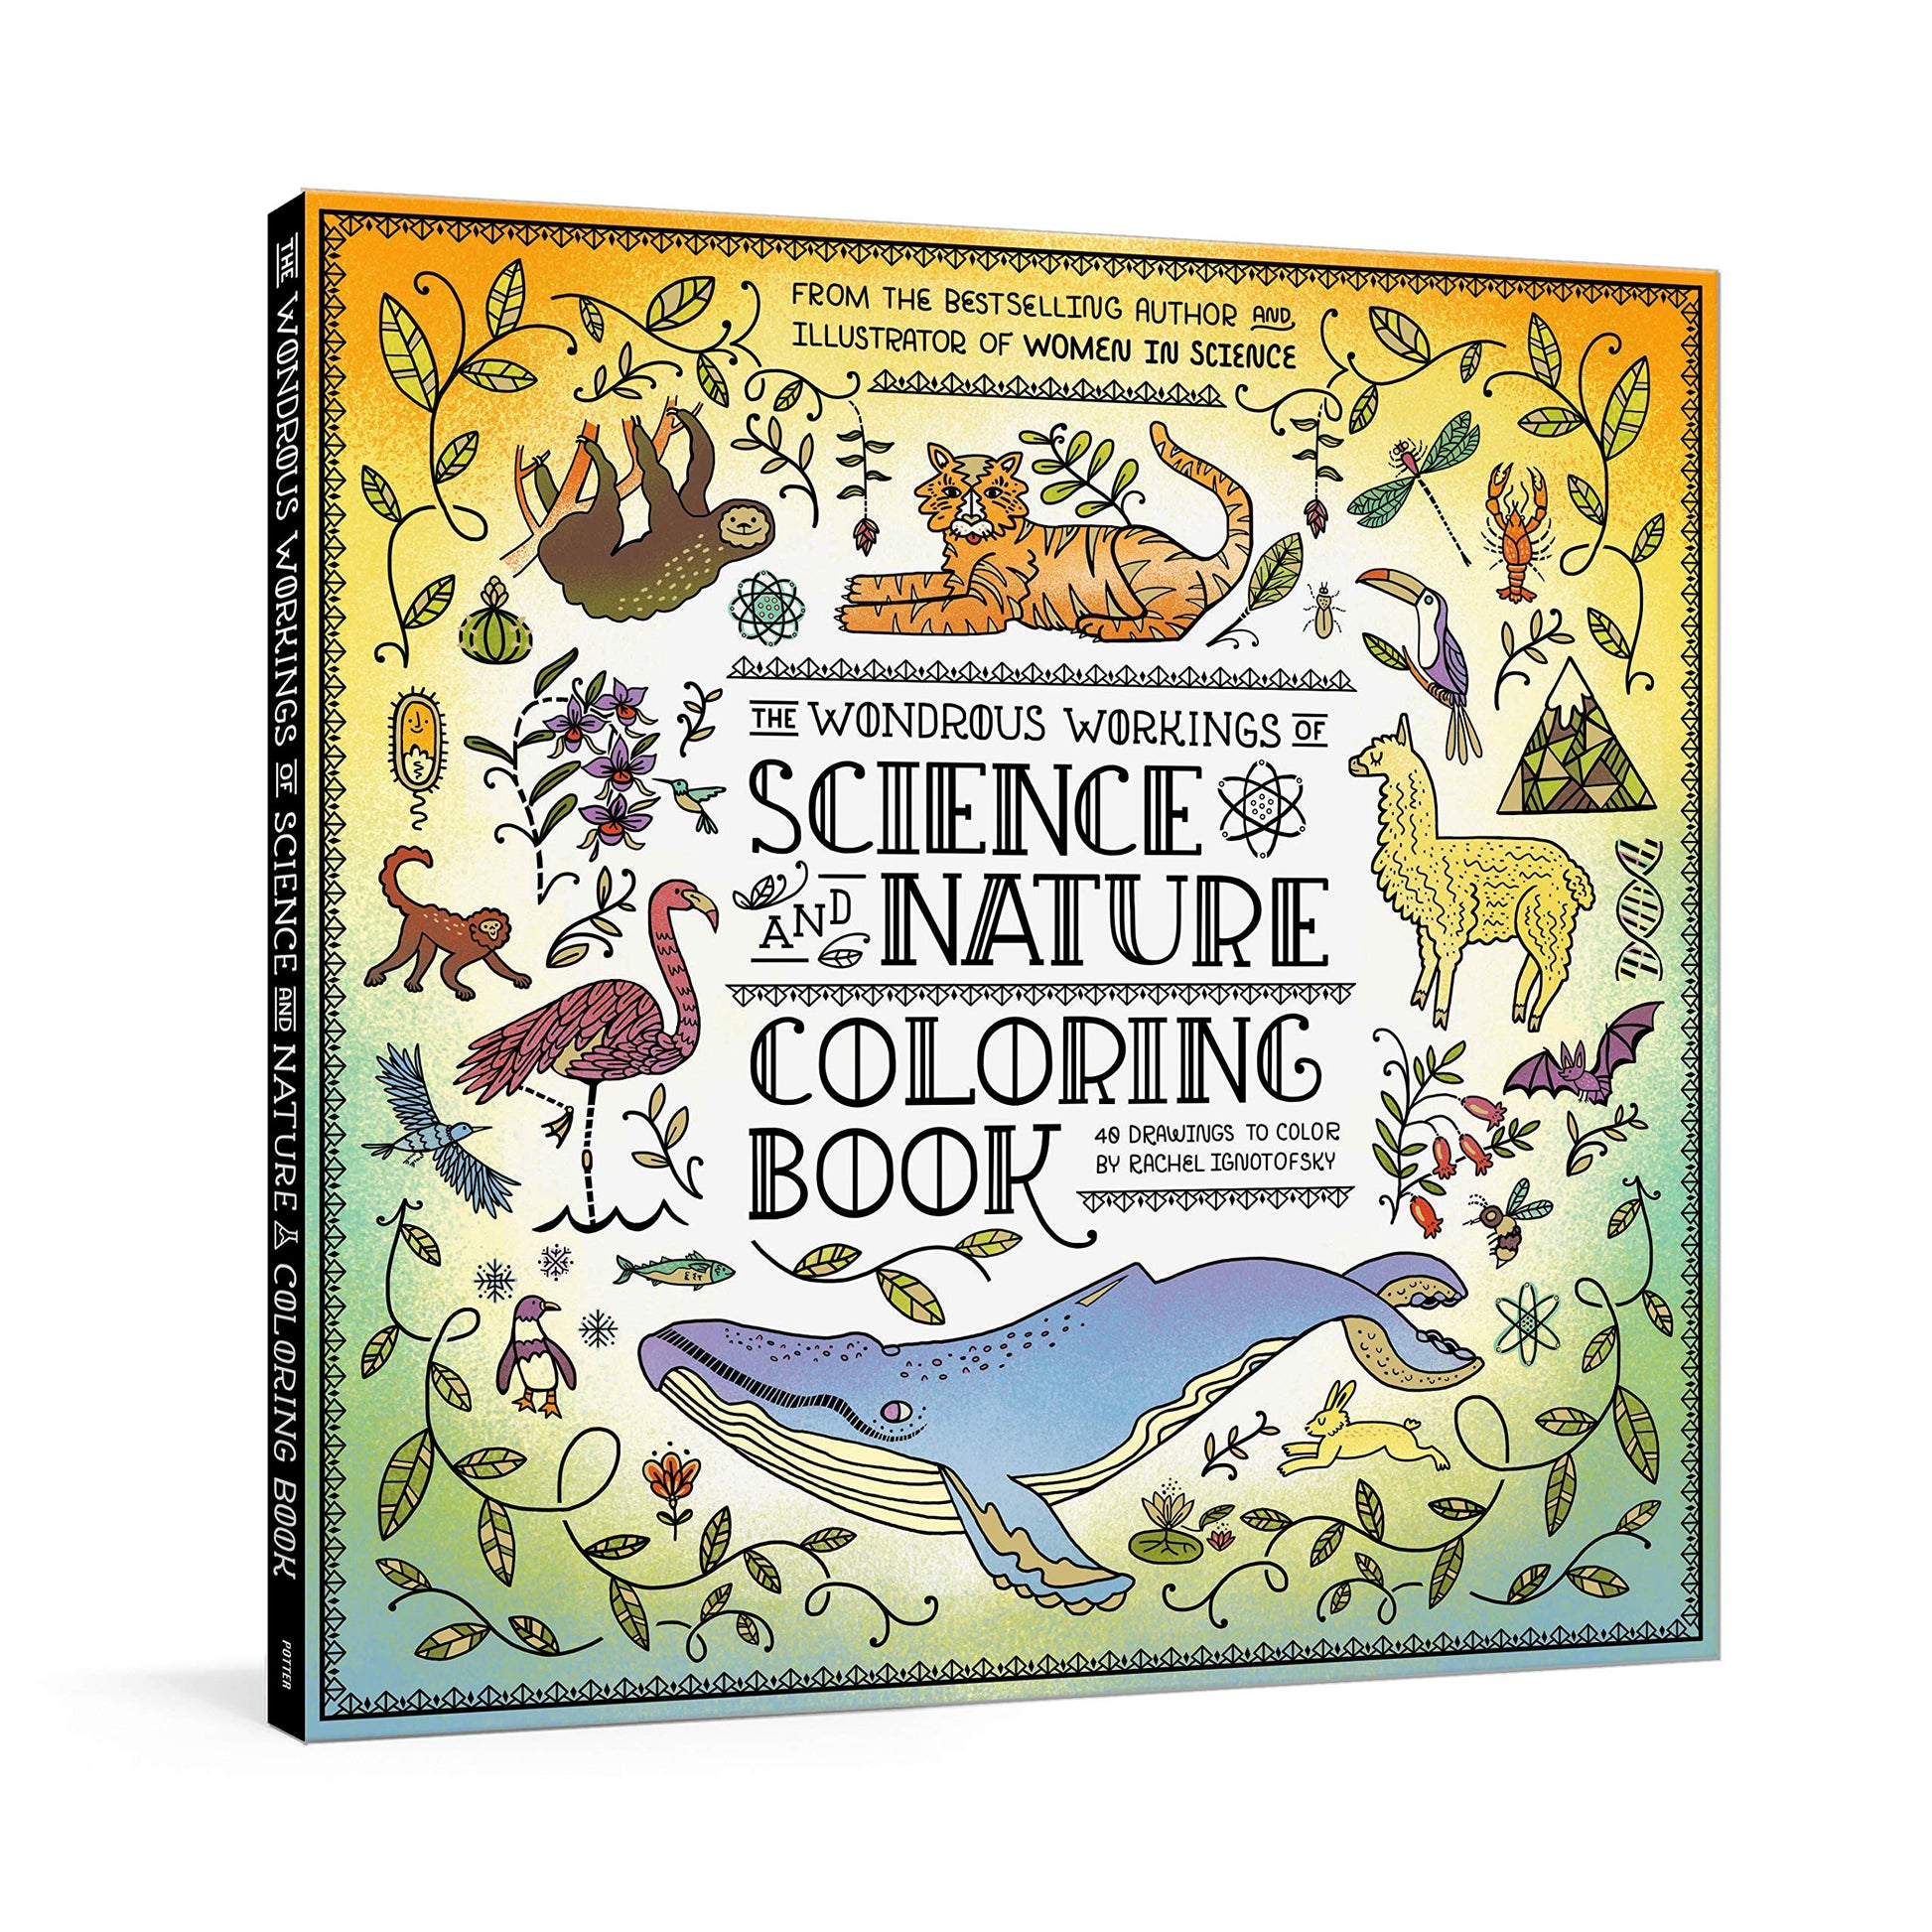 the wondrous workings of science and nature coloring book rachel ignotofsky elegant absorbing coloring book intricate line drawings illustrations science nature life brilliant gorgeous illuminating intricate informative artwork facts ecosystems reefs rainforests ponds gardens cell lab tools nature charming educational guide random house of canada penguin random house 